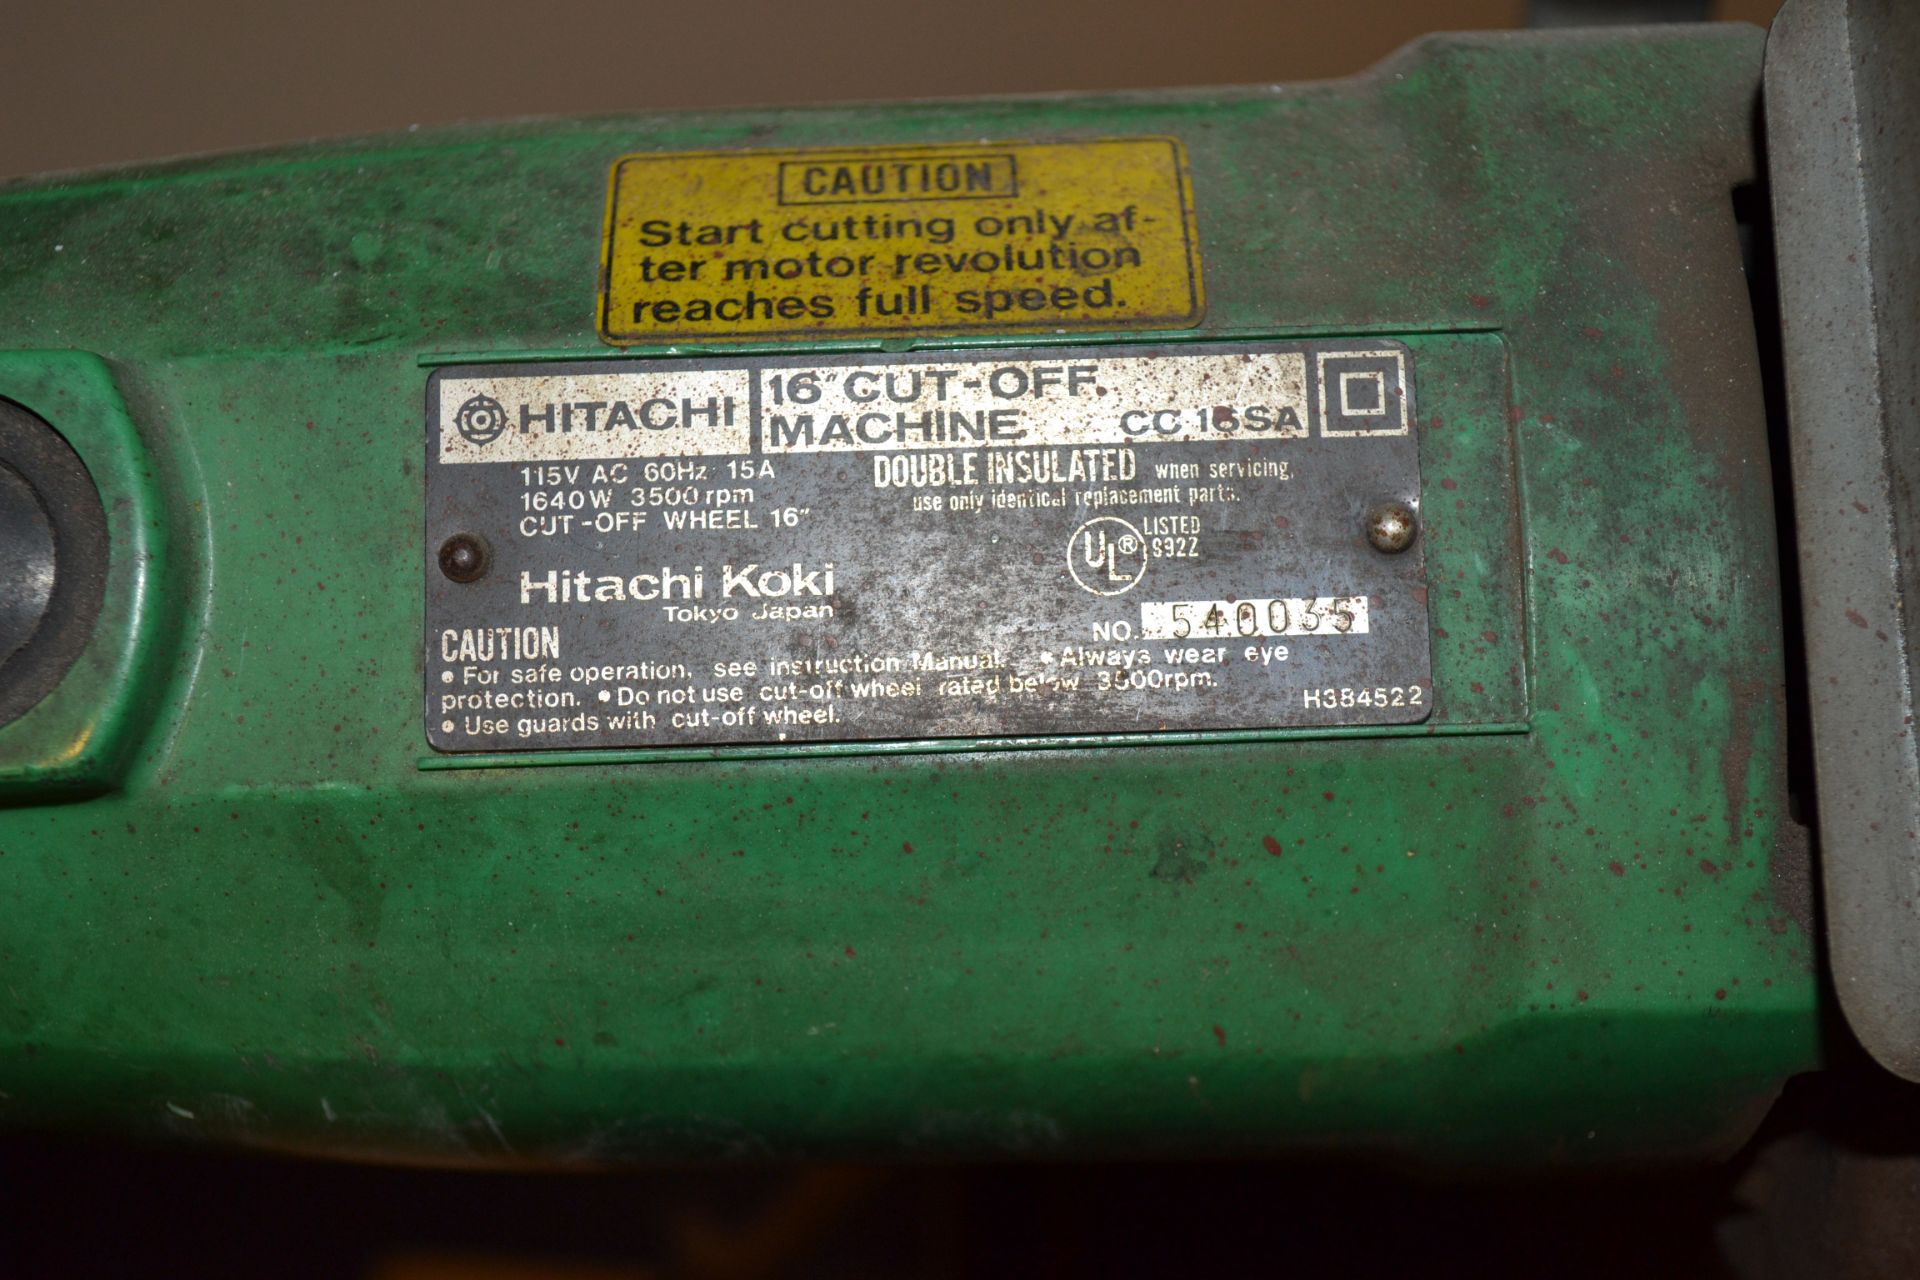 Hitchi Model CC16SA 16" Cut-Off Saw With Extra Blades - Image 2 of 6